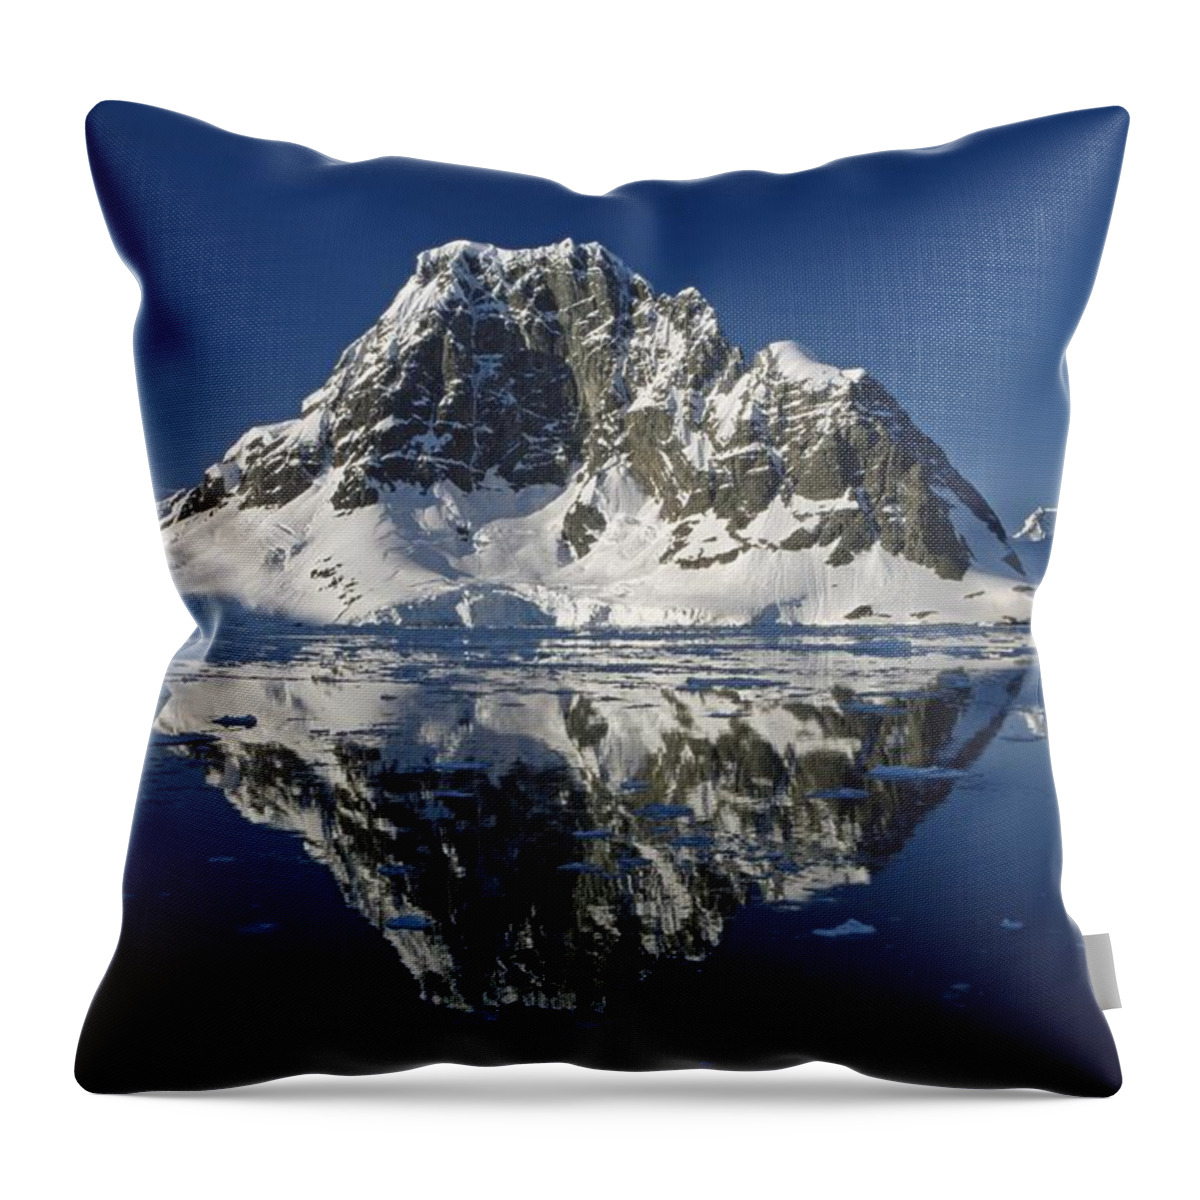 Landscape; Seascape; Reflection; Rocky; Rocks; Rock; Coast; Coastal; Shore; Ice; Icy; Mountain; Mountainous; Dramatic; Picturesque; Cliff; Cliffs; Glacier; Still; Calm; Scenic; View; Blue Sky; Reflected; Peak; Remote; South Pole Throw Pillow featuring the photograph Reflections with ice by Antarctica